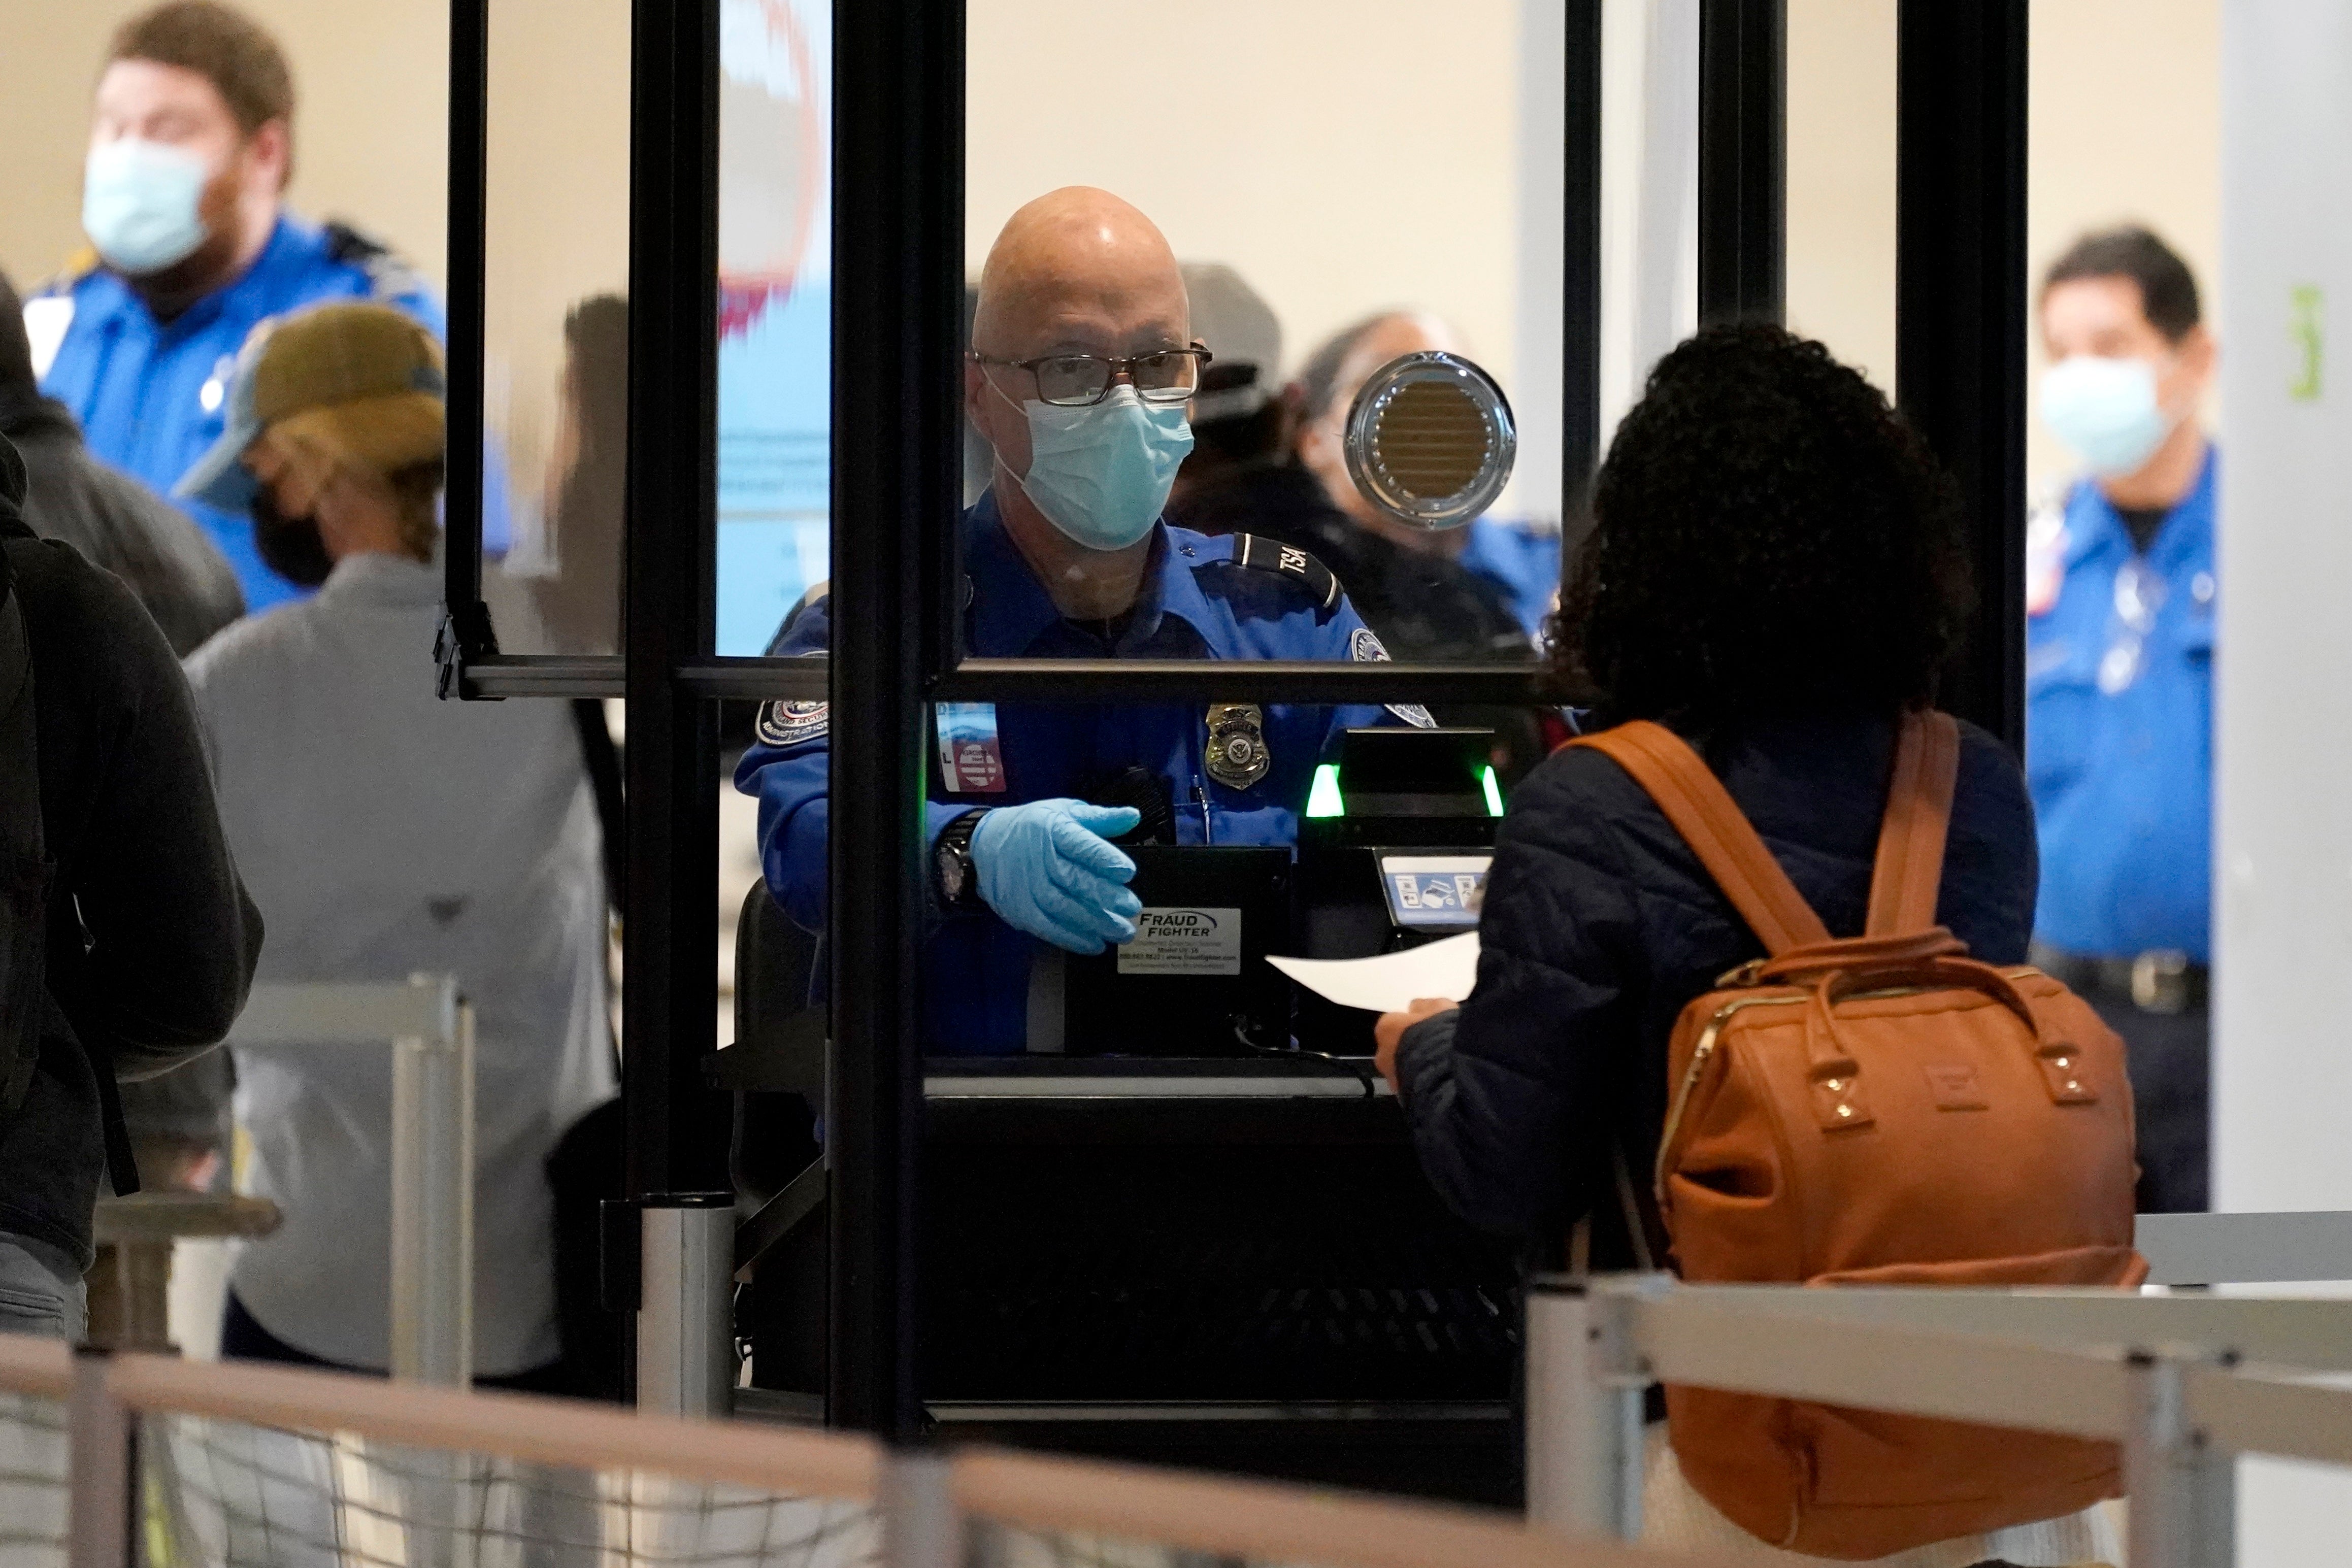 The TSA can deny entry to passengers not wearing masks